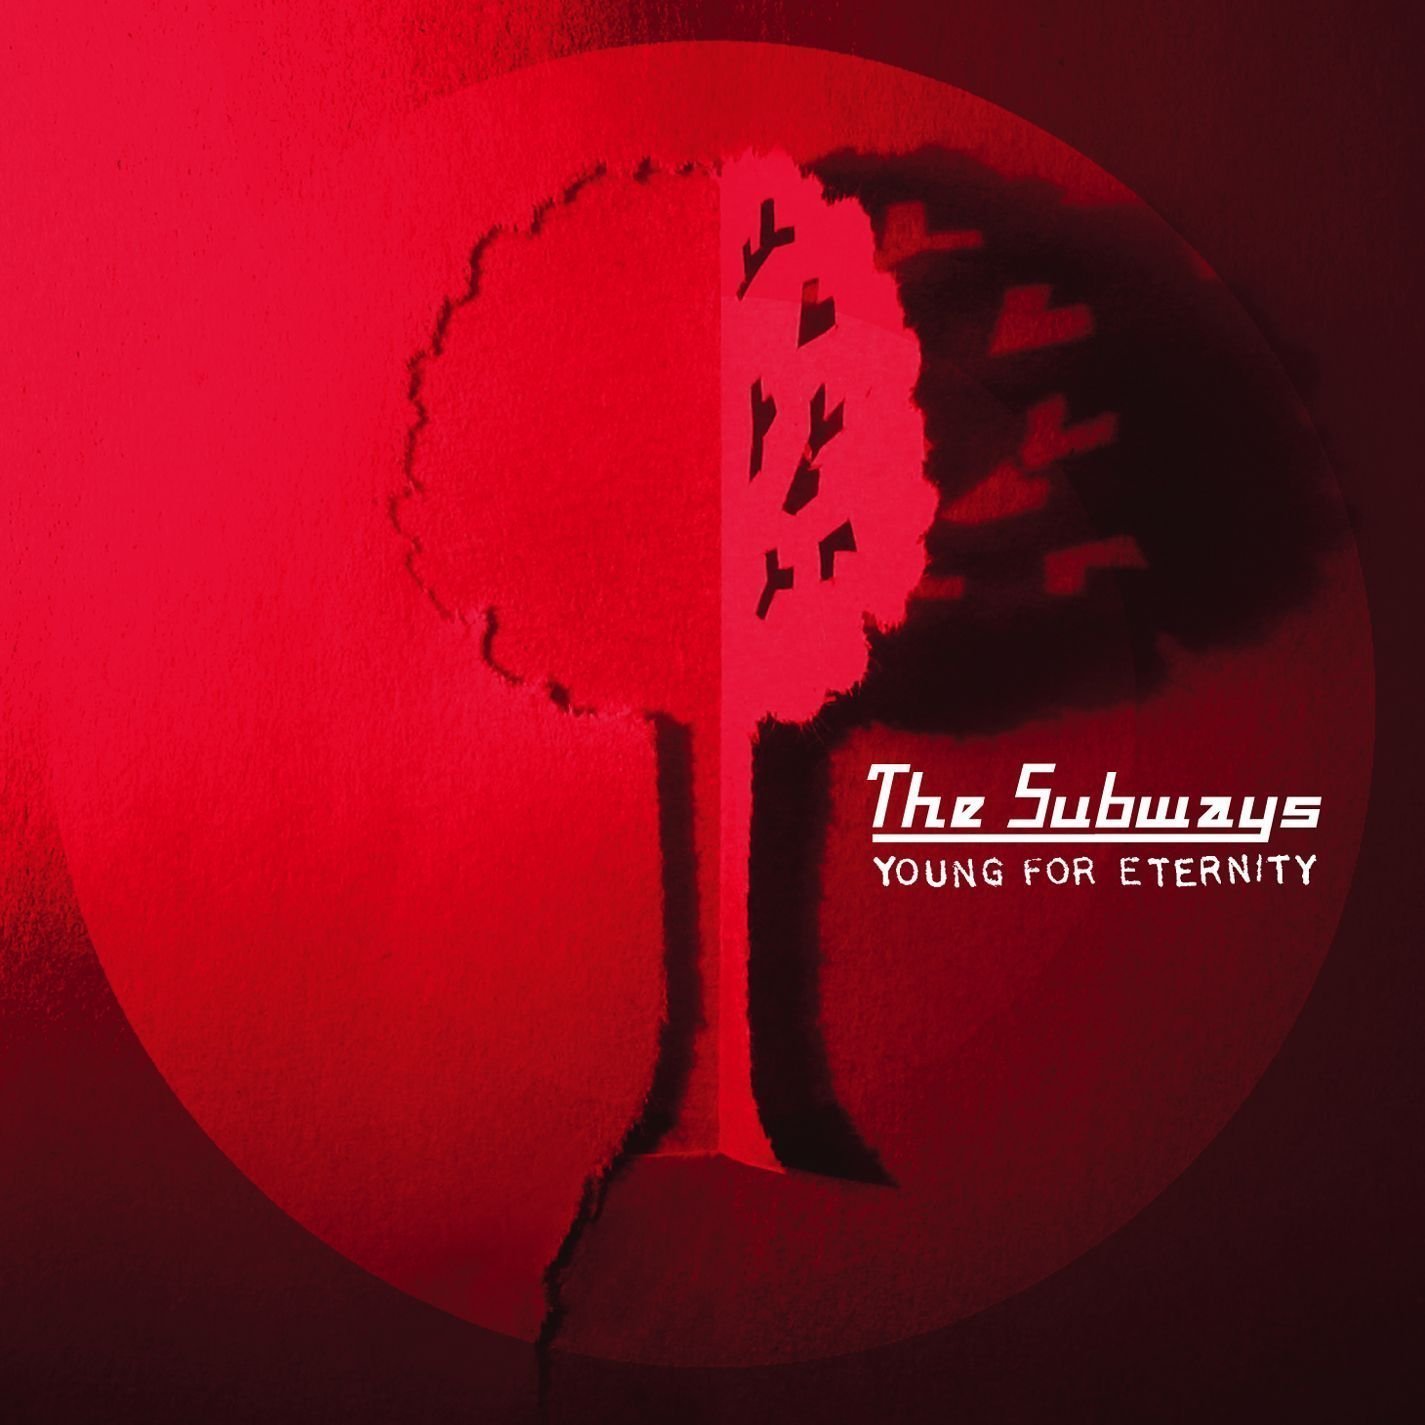 Vinylplade The Subways - Young For Eternity (LP)